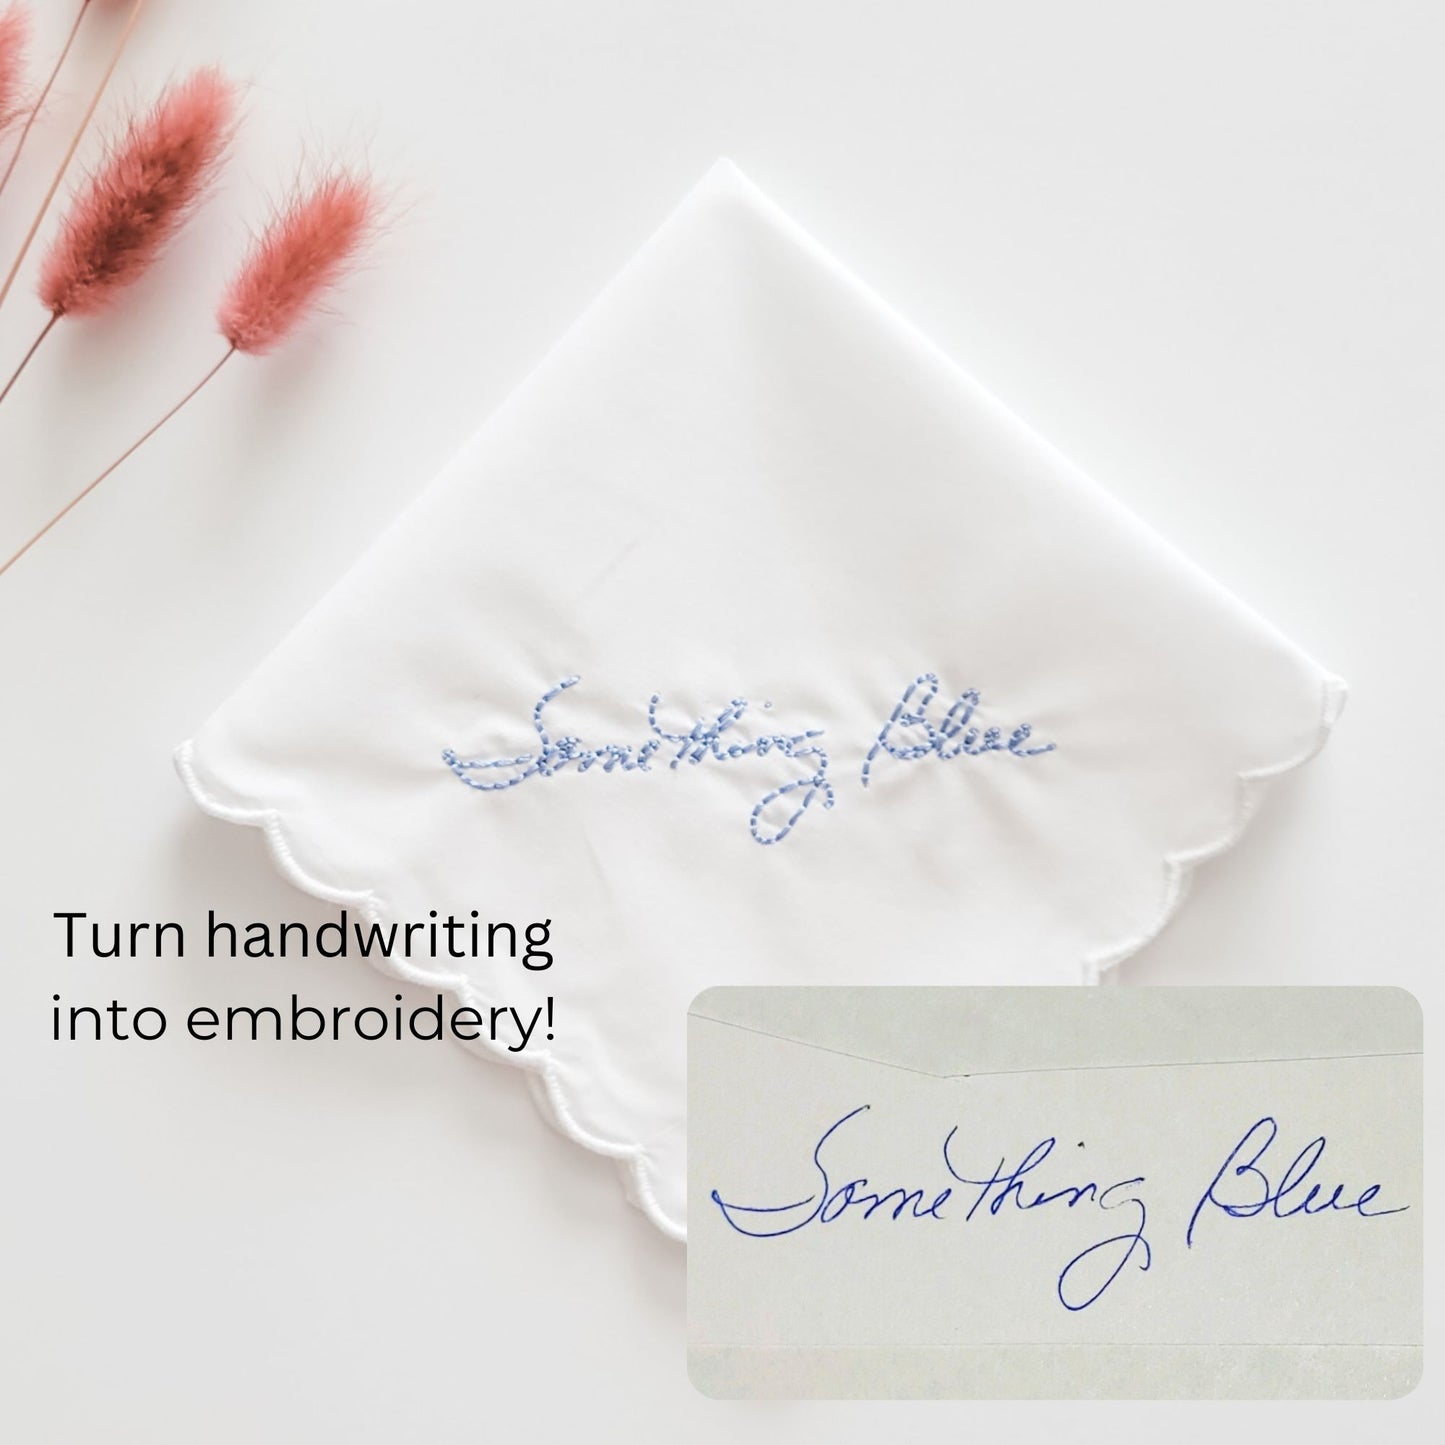 Turn handwriting into an embroidered hankerchief